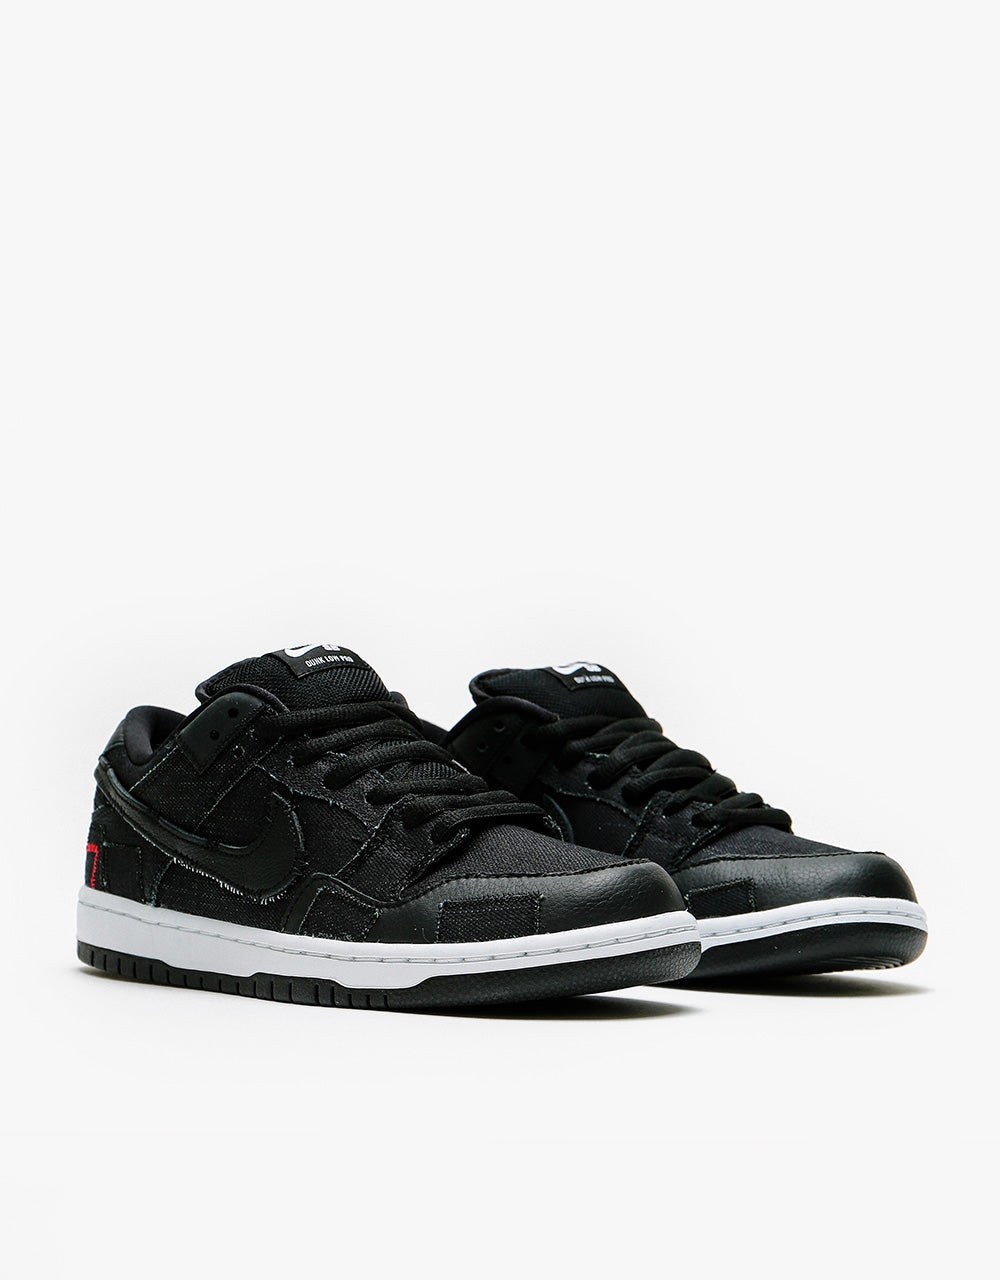 Nike SB 'Wasted Youth' Dunk Low Pro QS